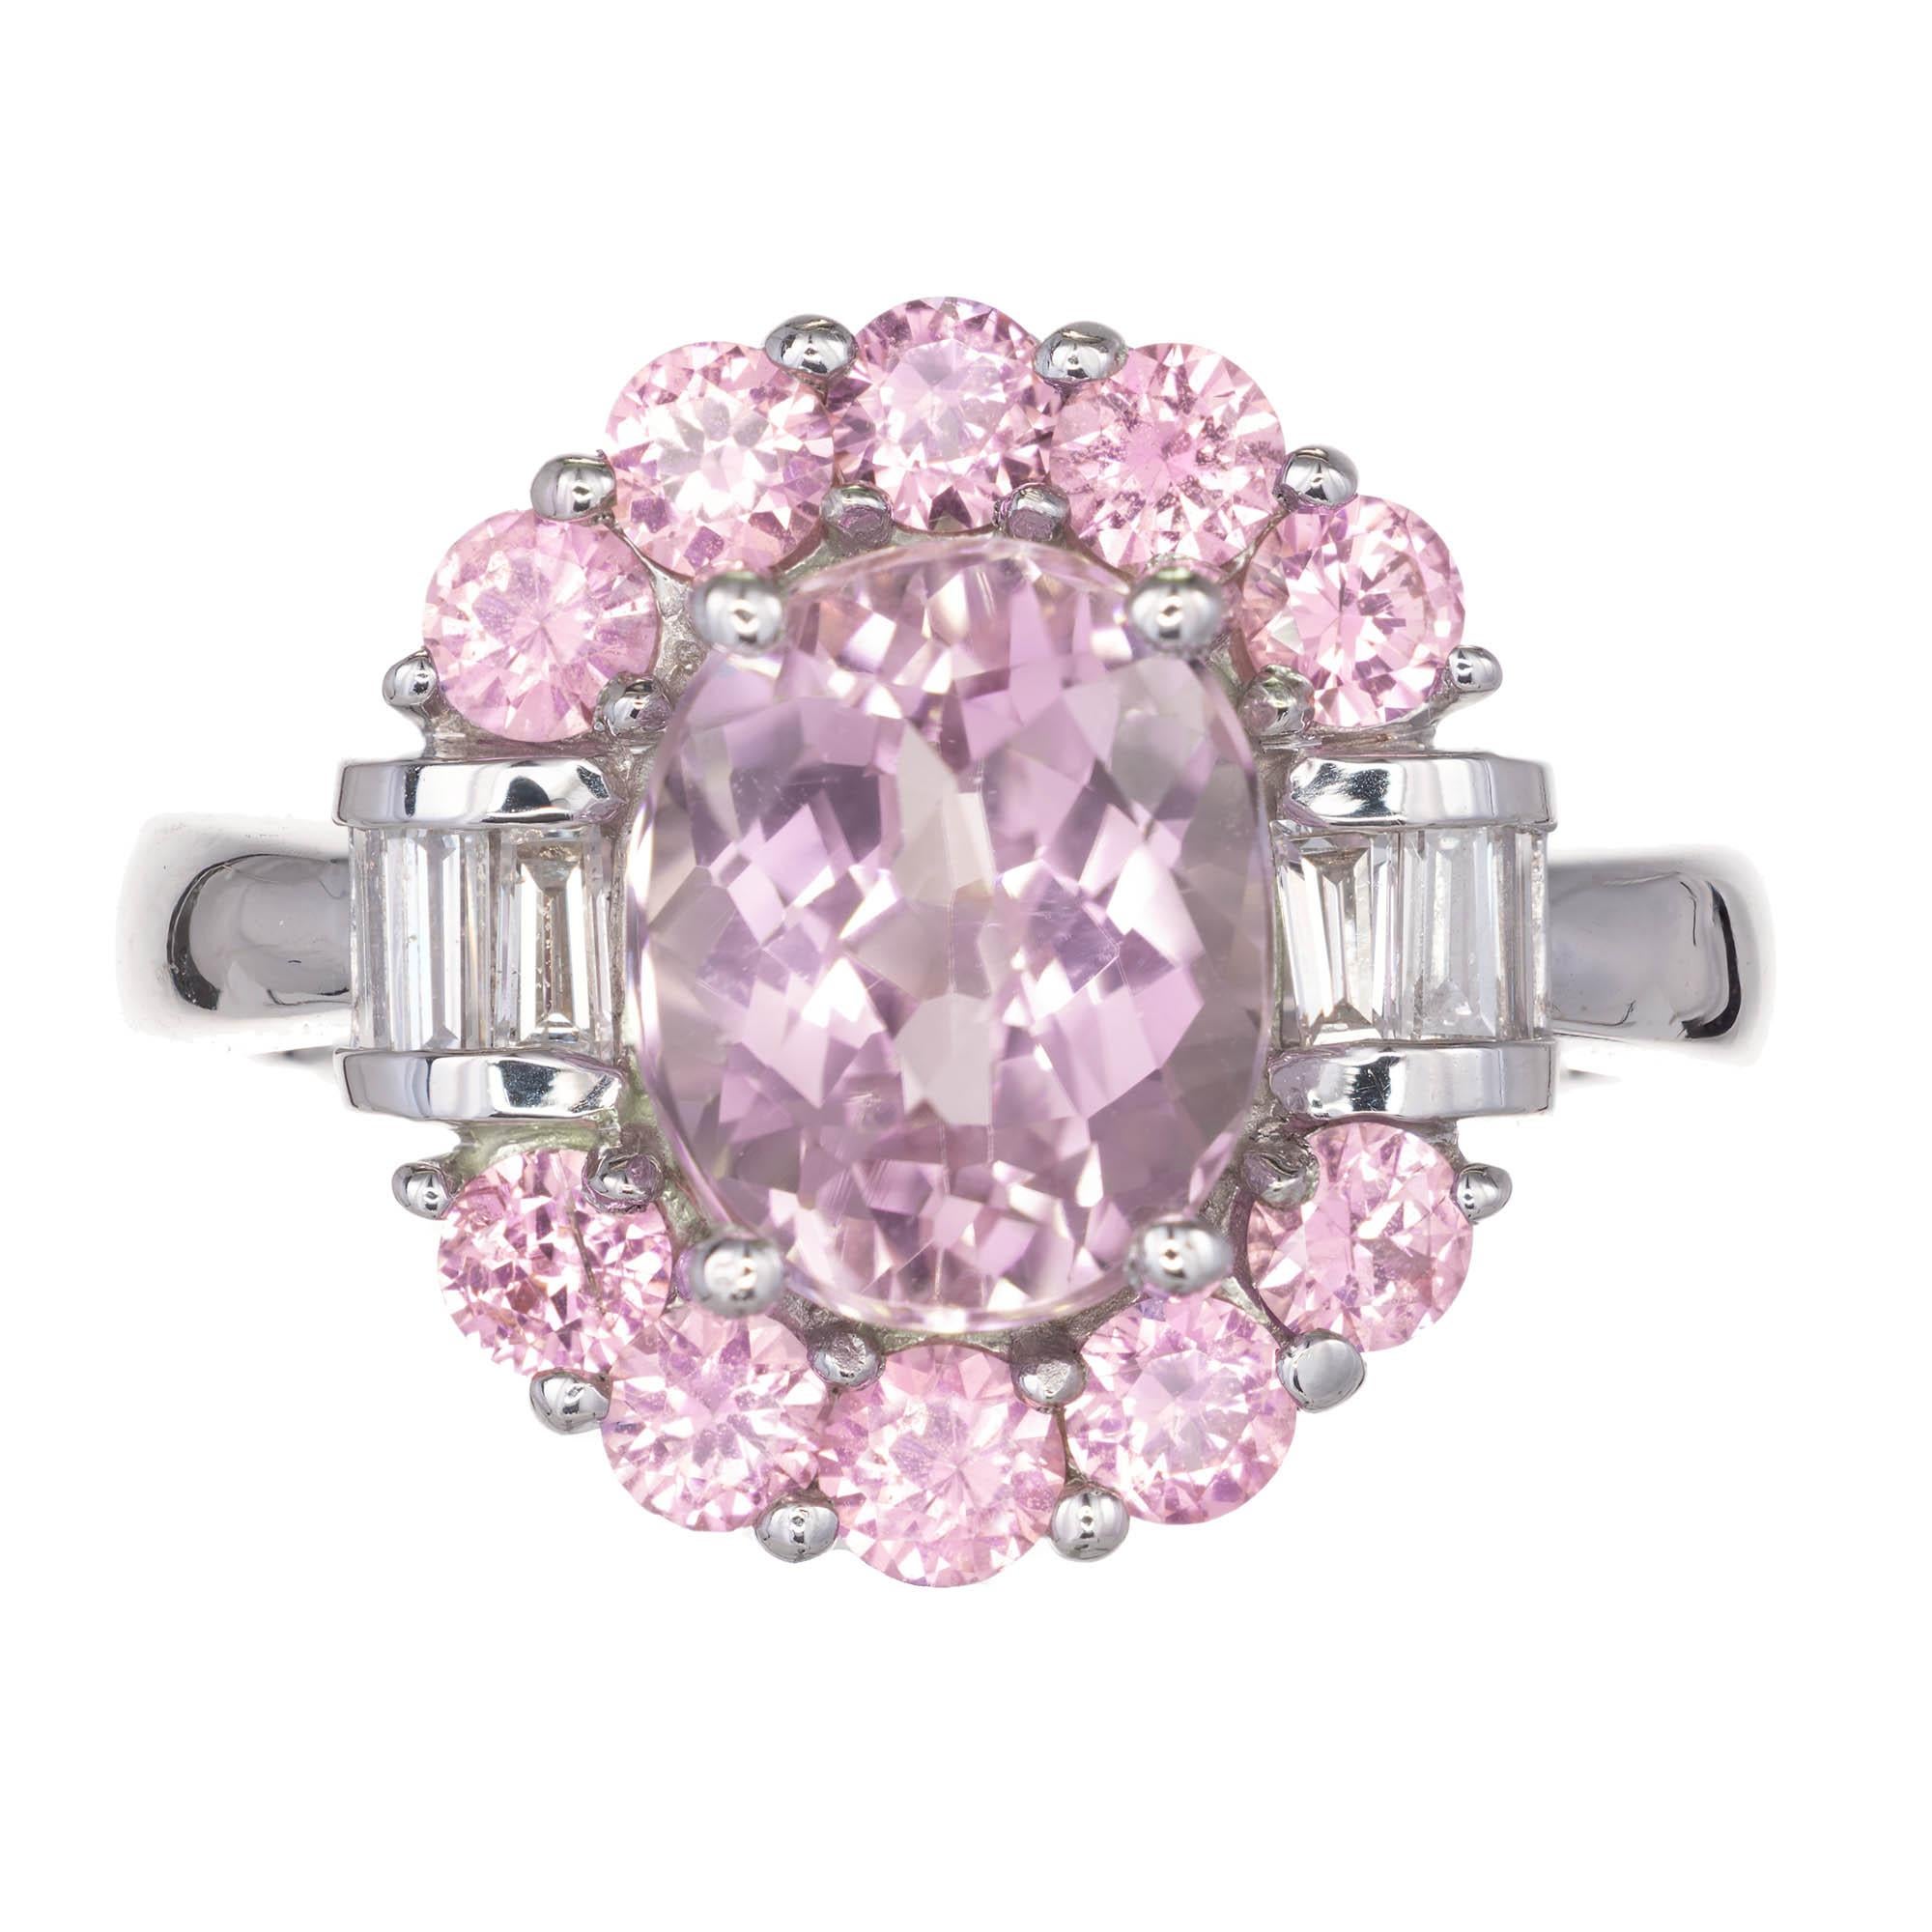 Light lavender oval faceted Amethyst set with round pink sapphires above and below by baguette diamonds in a 14k white gold setting.

1 oval pale amethyst Approximate 2.75 carats
10 round pink sapphires Approximate 1.50 carats
6 baguette G-H VS